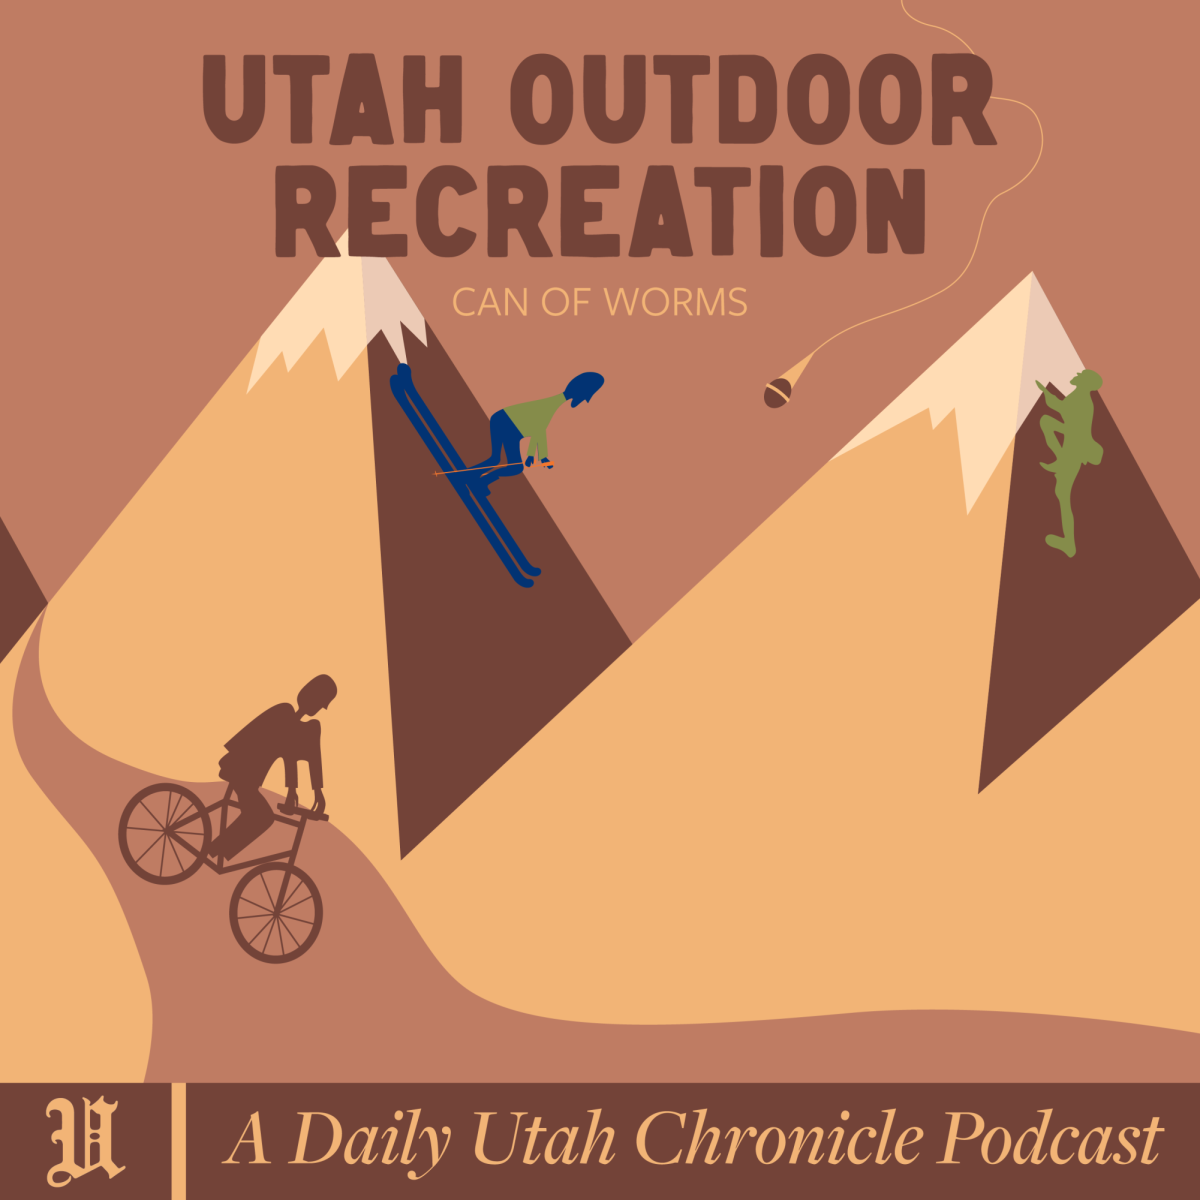 (Design by Mary Allen | The Daily Utah Chronicle)